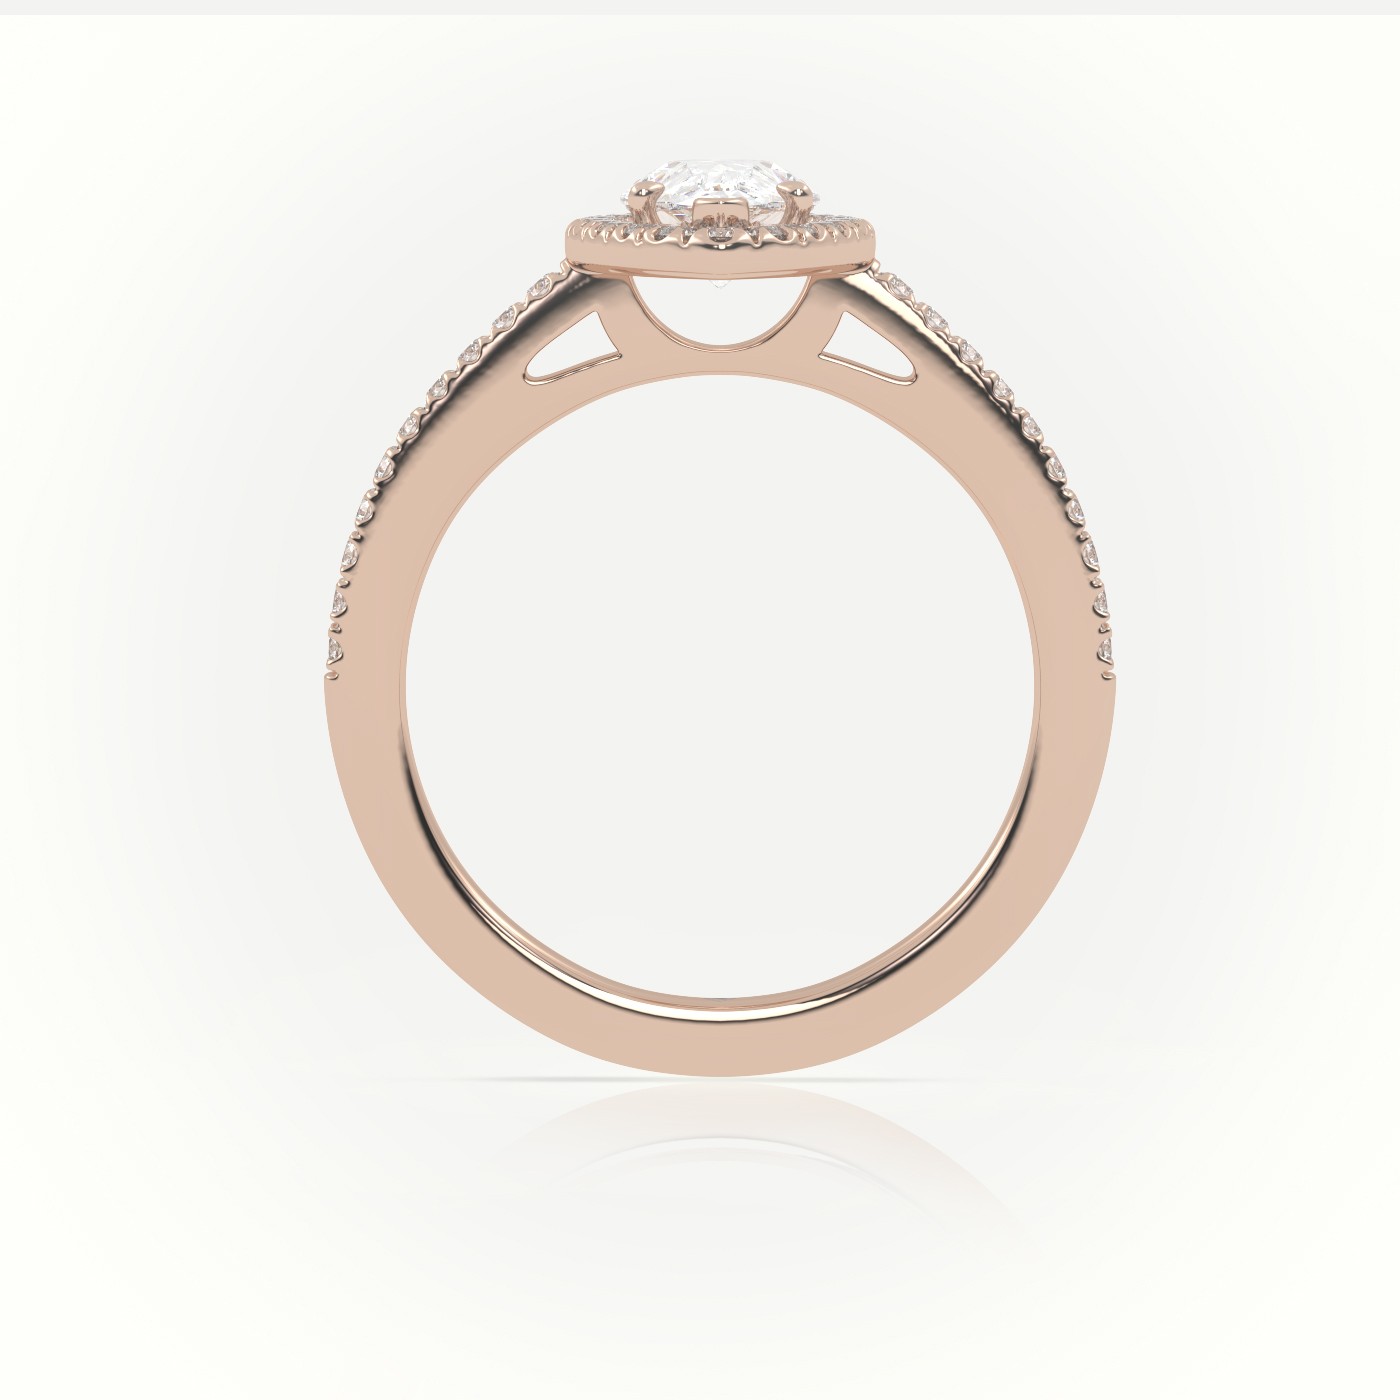 18K ROSE GOLD PEAR CUT DIAMOND HALO PAVE SETTING ENGAGEMENT RING